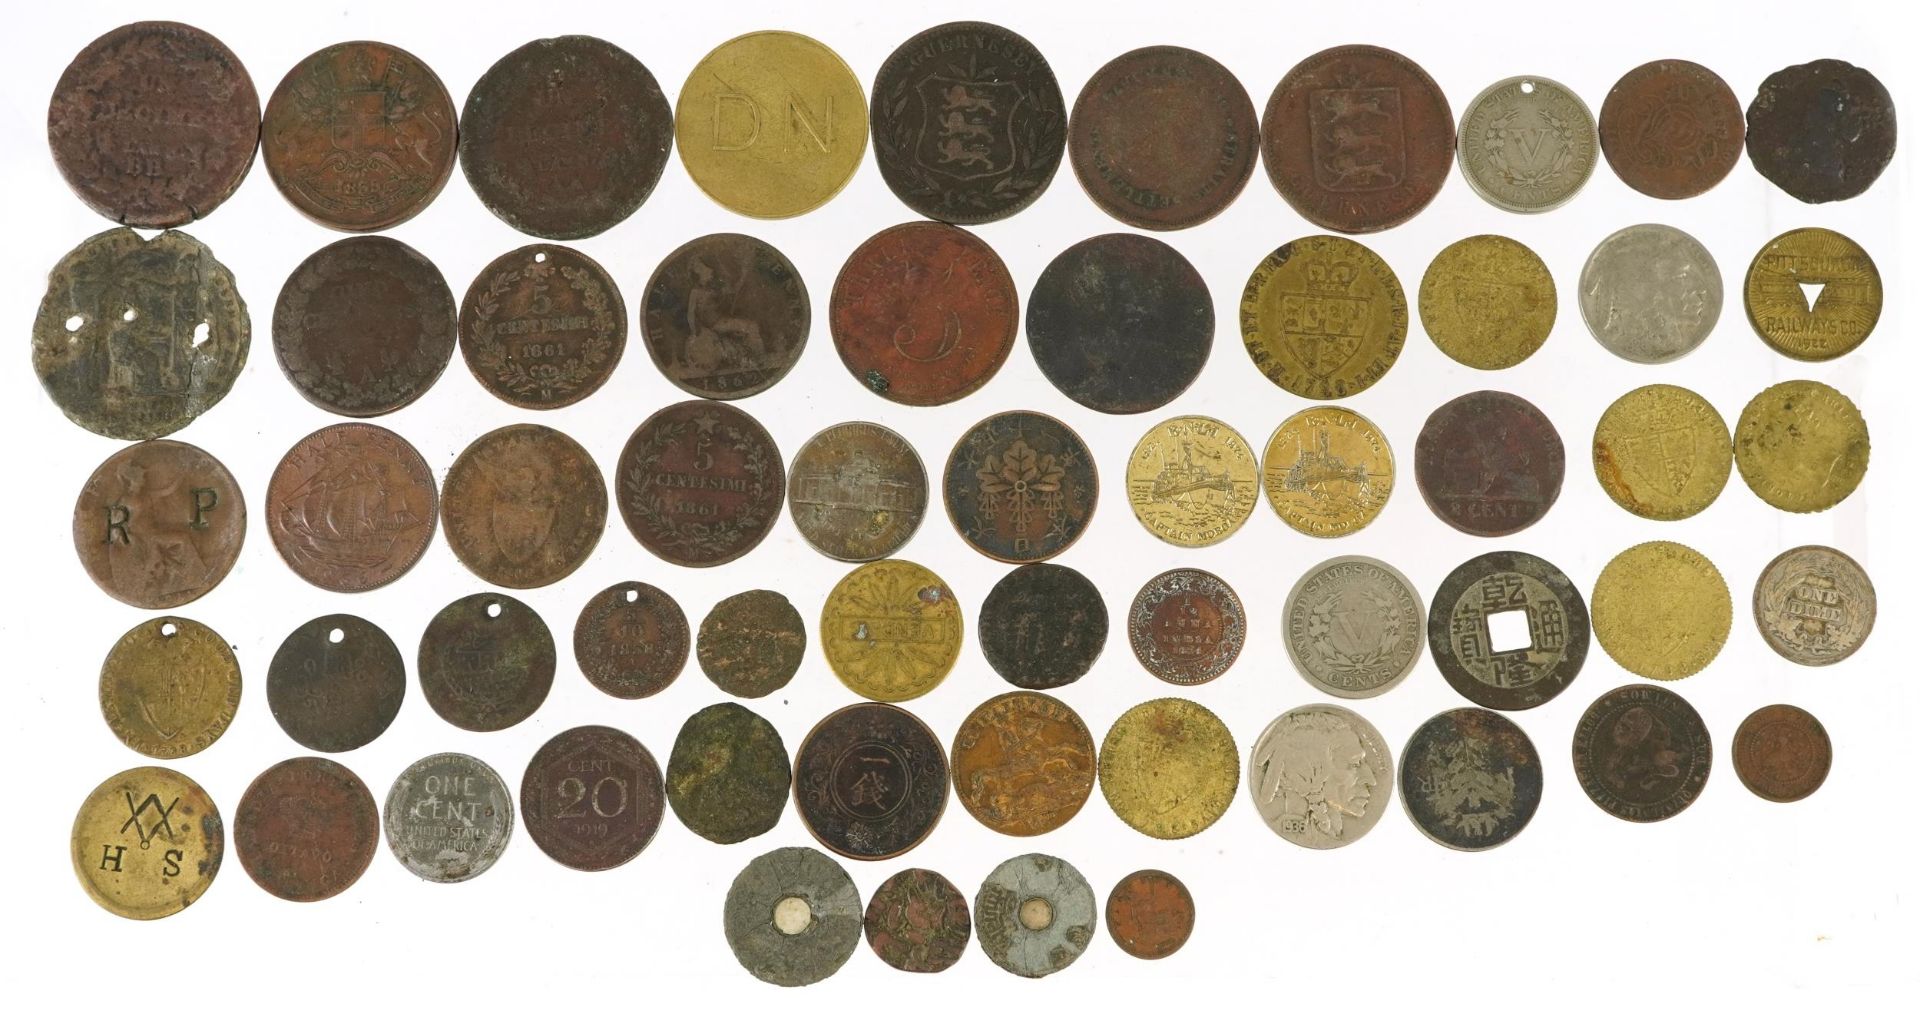 Antique and later British and world coinage including Queen Anne 1711 farthing : For further